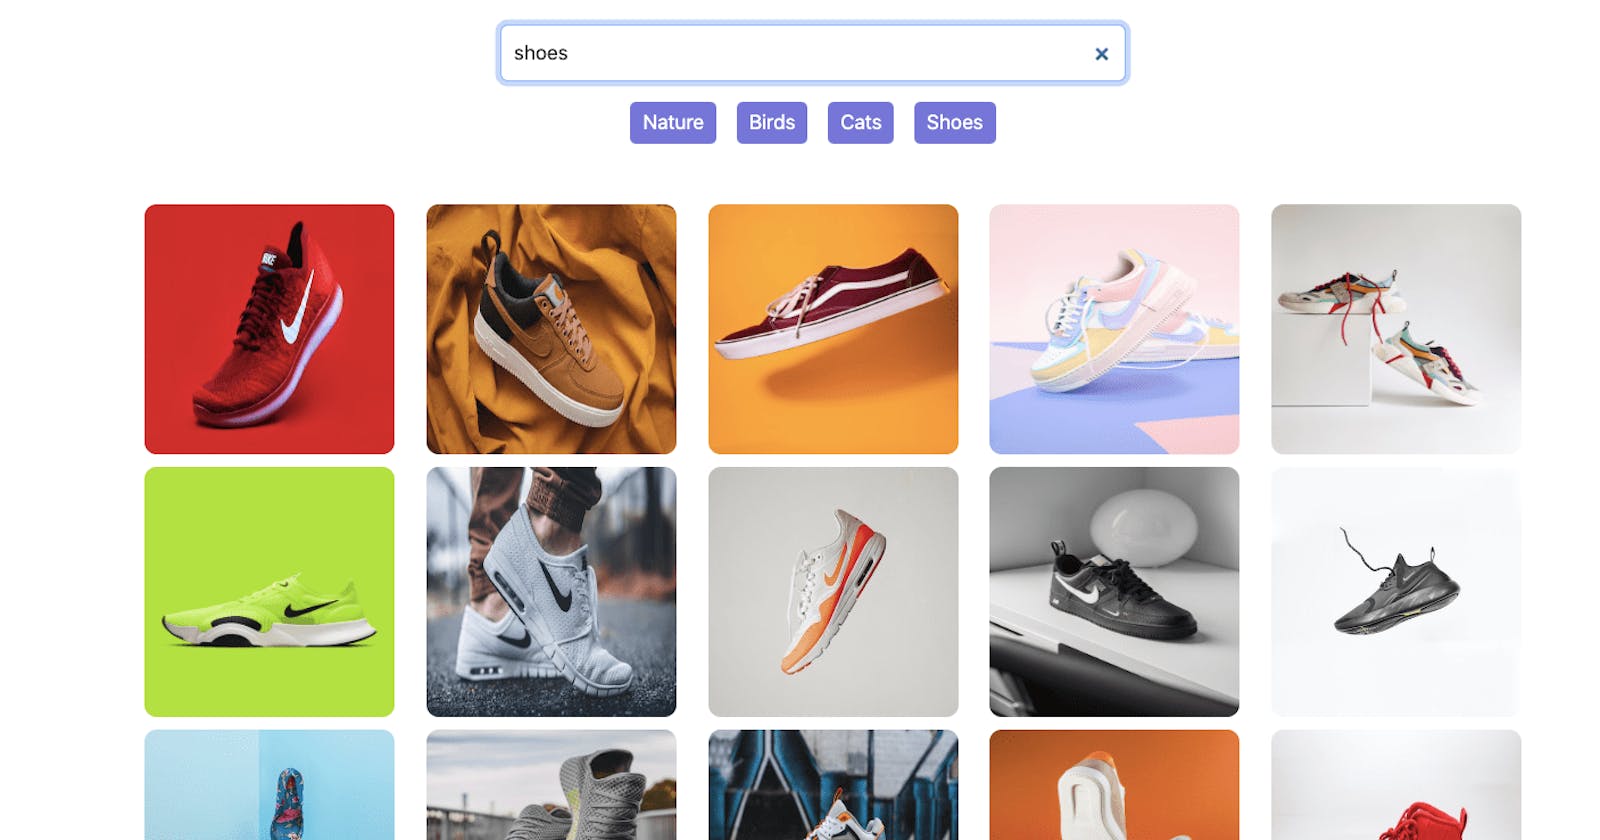 How to Build an Image Search App With Pagination Using React